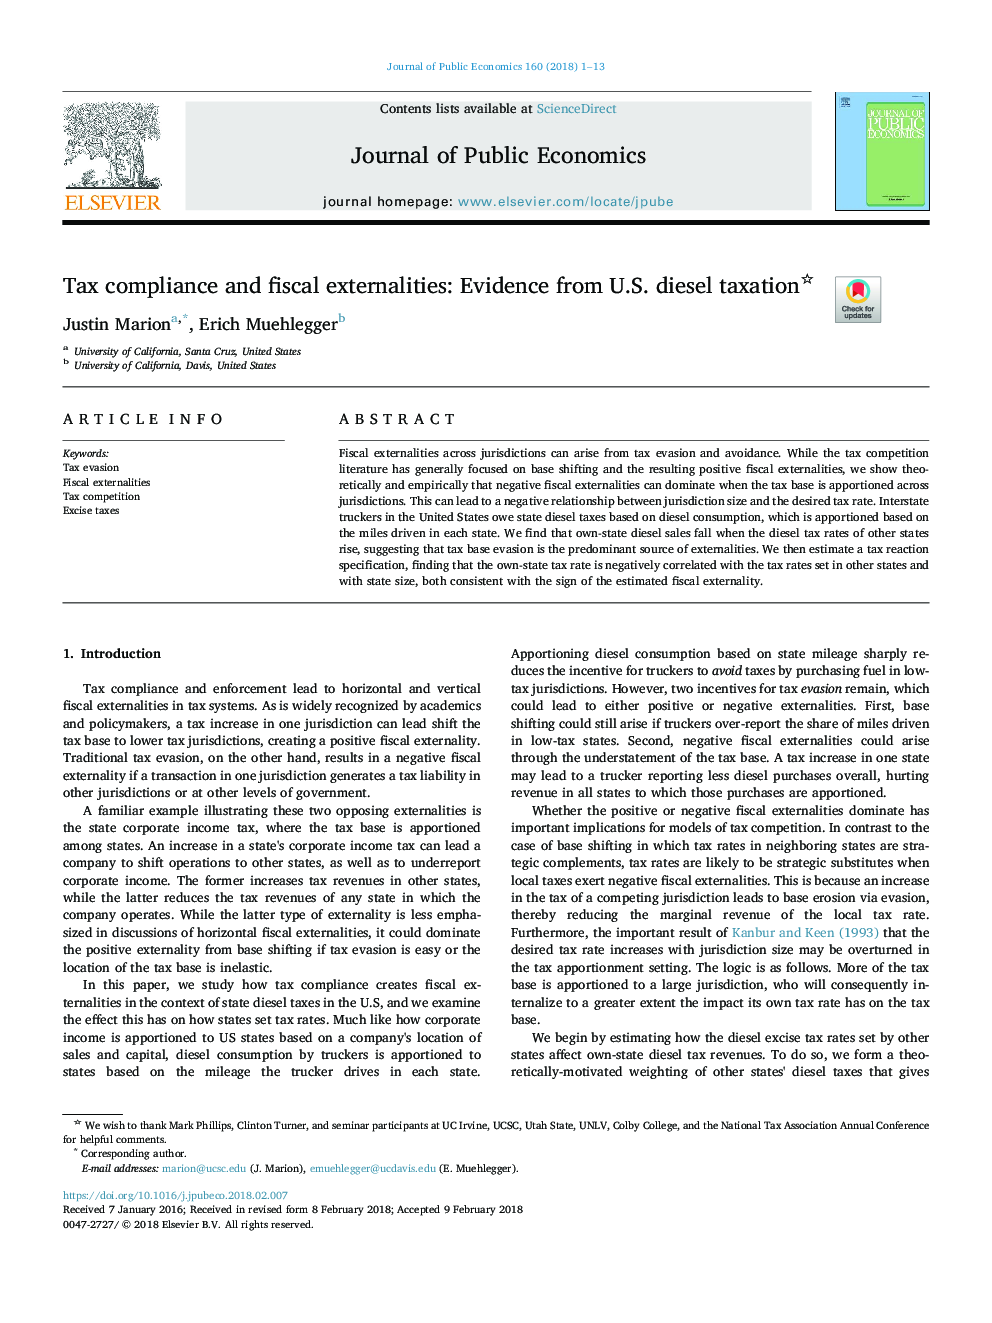 Tax compliance and fiscal externalities: Evidence from U.S. diesel taxation